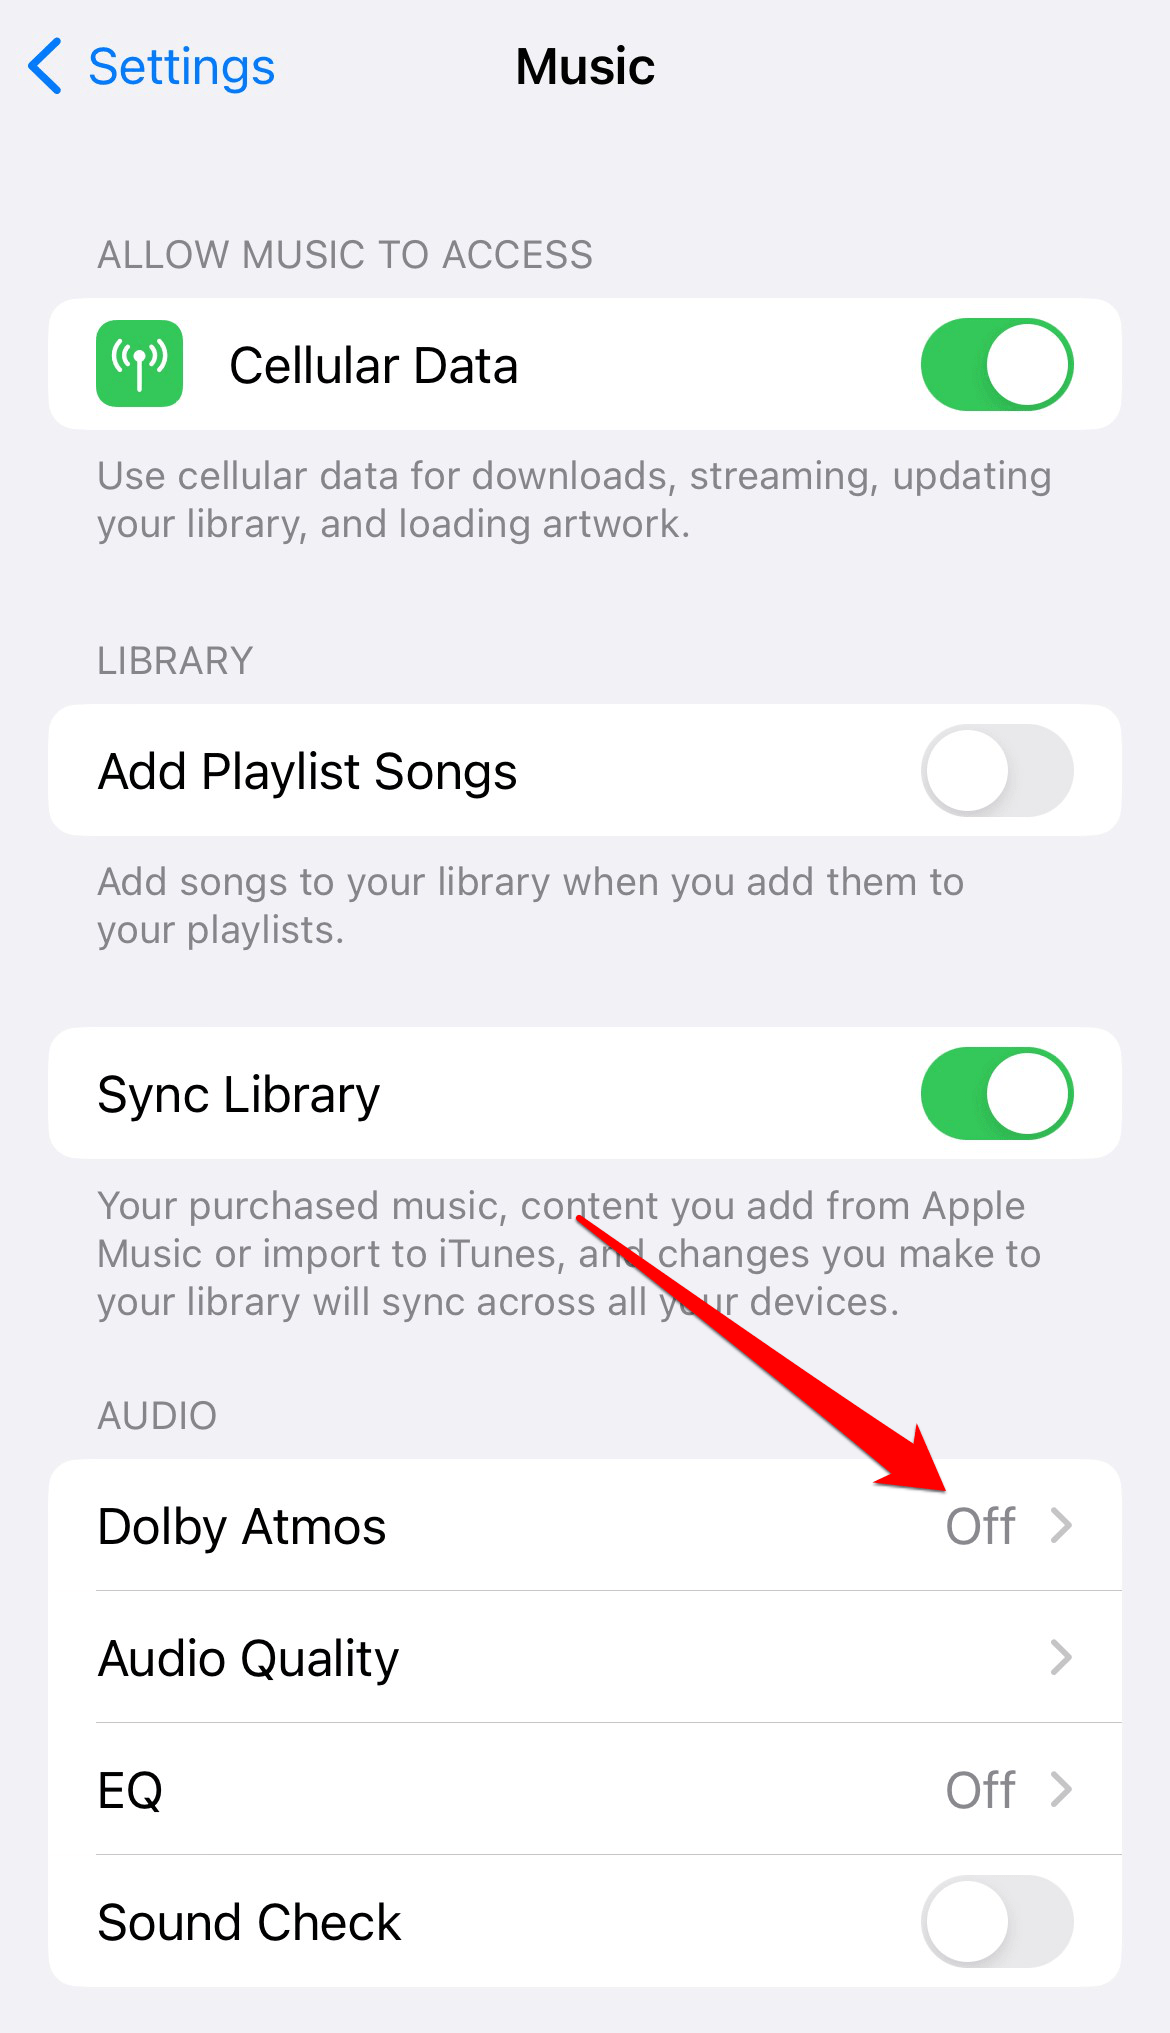 In the Audio section, tap Dolby Atoms and choose Off.